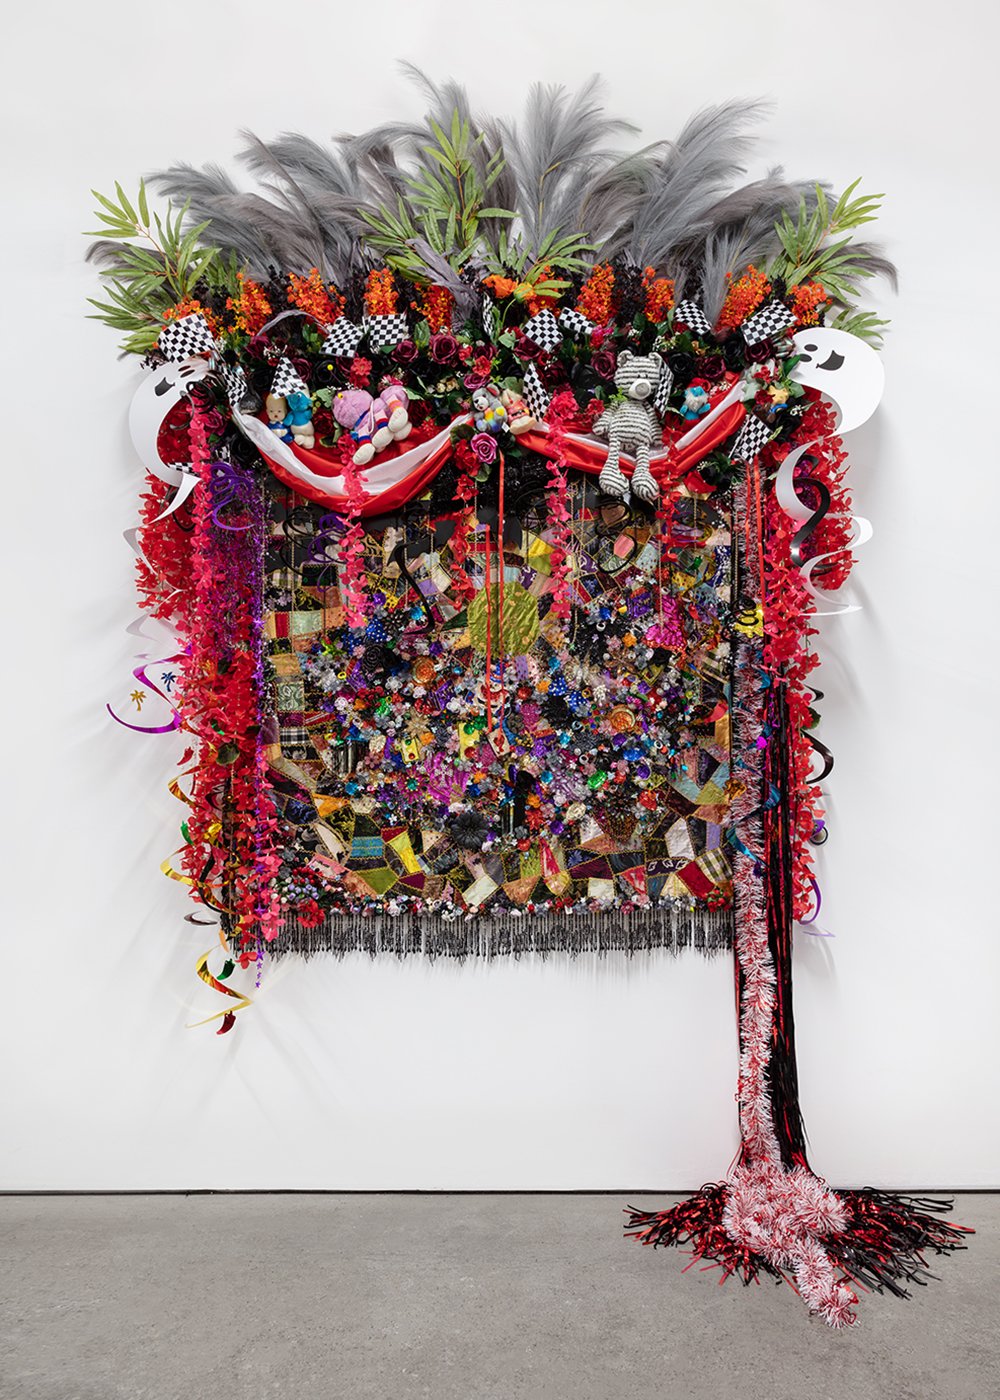   Shroud #11 , 2022, Found ‘Crazy’ quilt ca. 1898, trim, fabric flowers, streamers, banners, garland, metal chain, toys, ribbon, plastic jewelry, buttons, plastic flowers and fauna, beads, thread, fabric, Douglas fir, 120 x 90 x 24” 